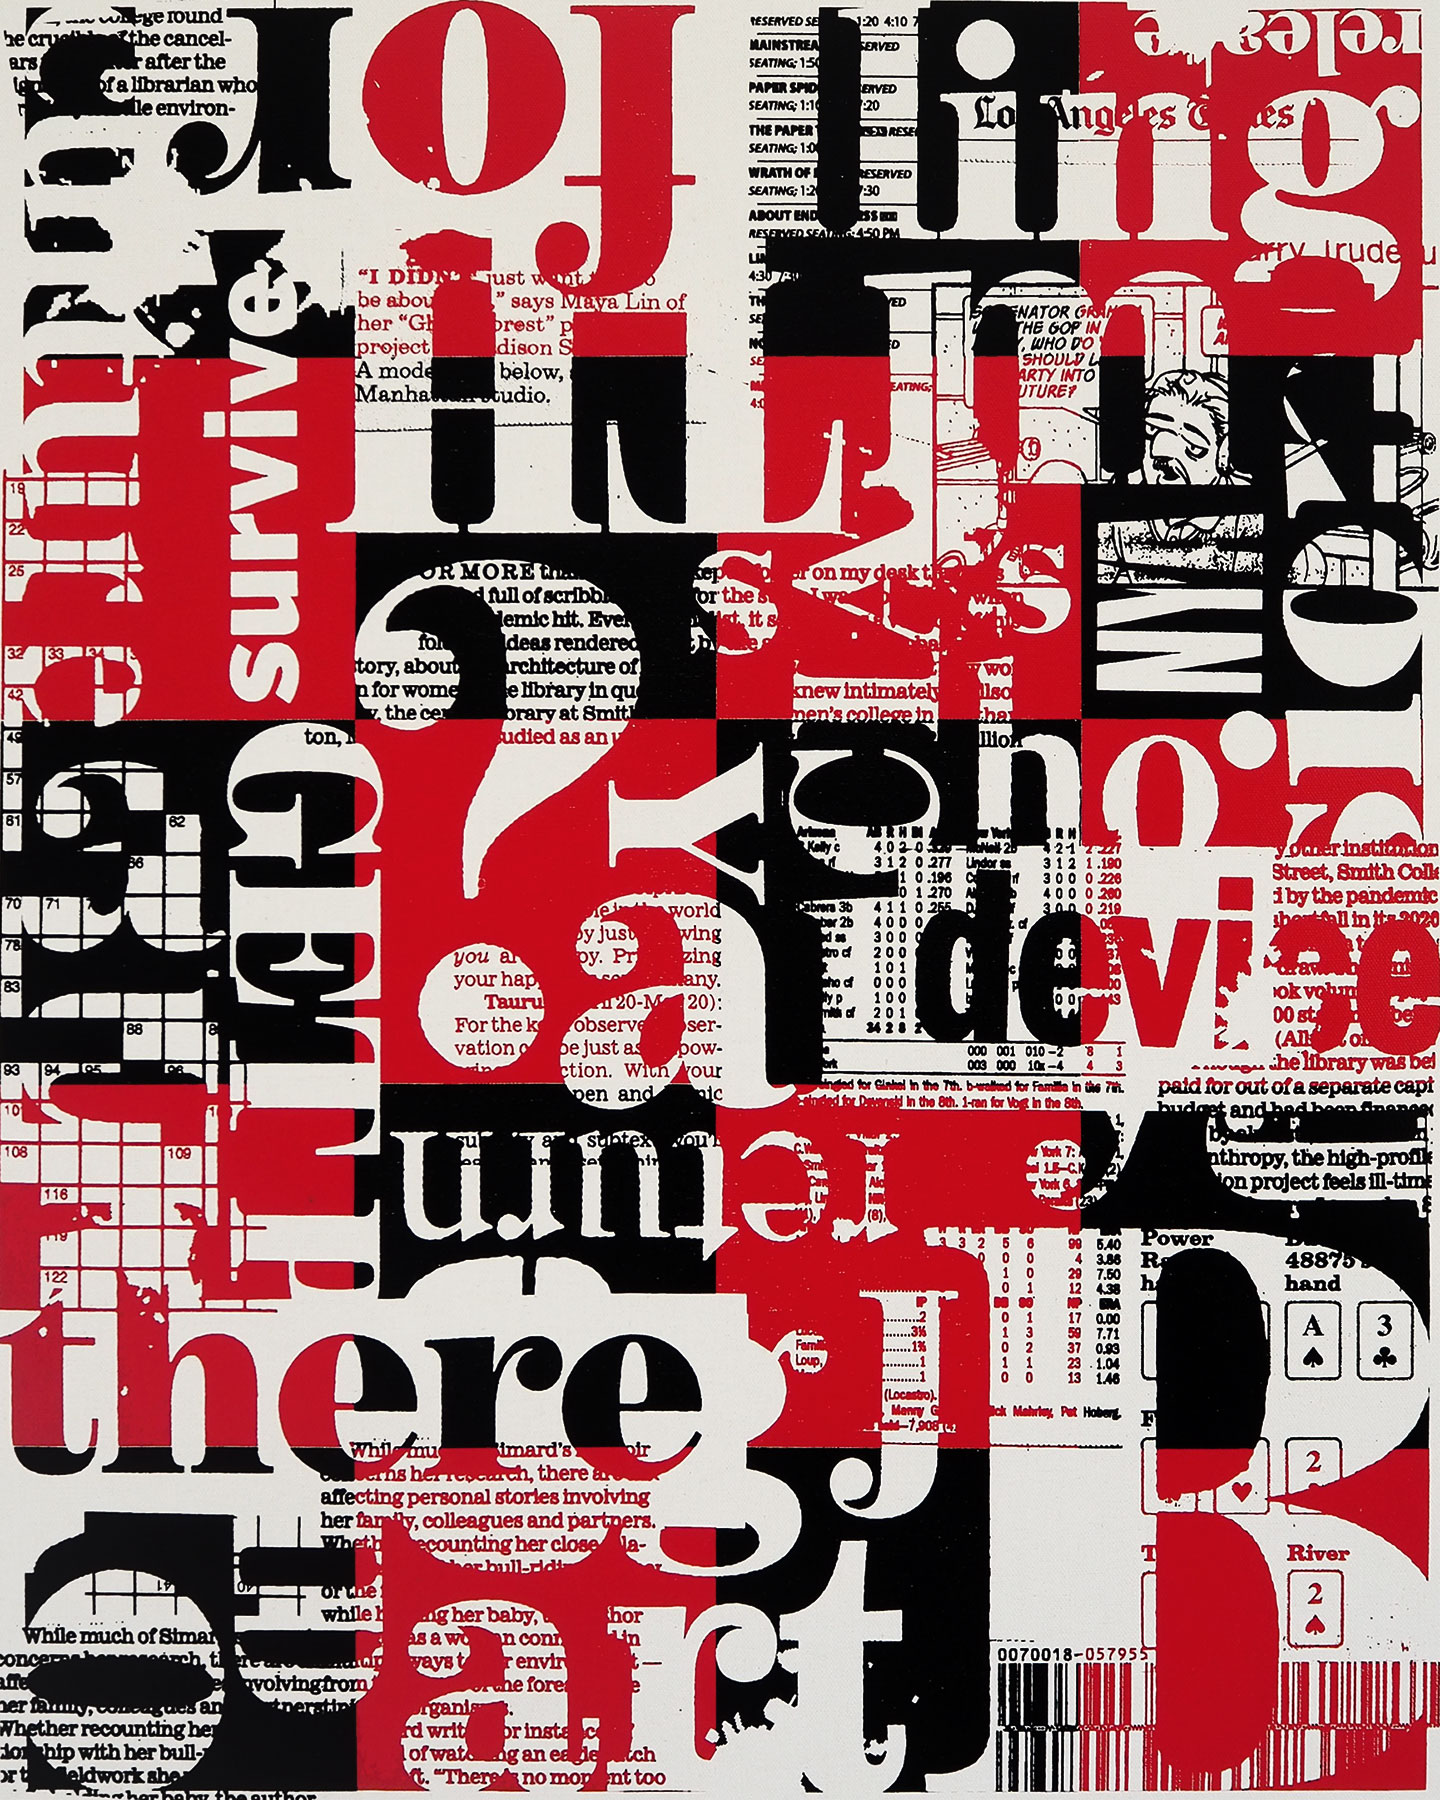 Howard Steenwyk created this 2 color (red and black on canvas) collage of graphic elements from the May 9th 2021 edition of the Los Angeles Times newspaper.